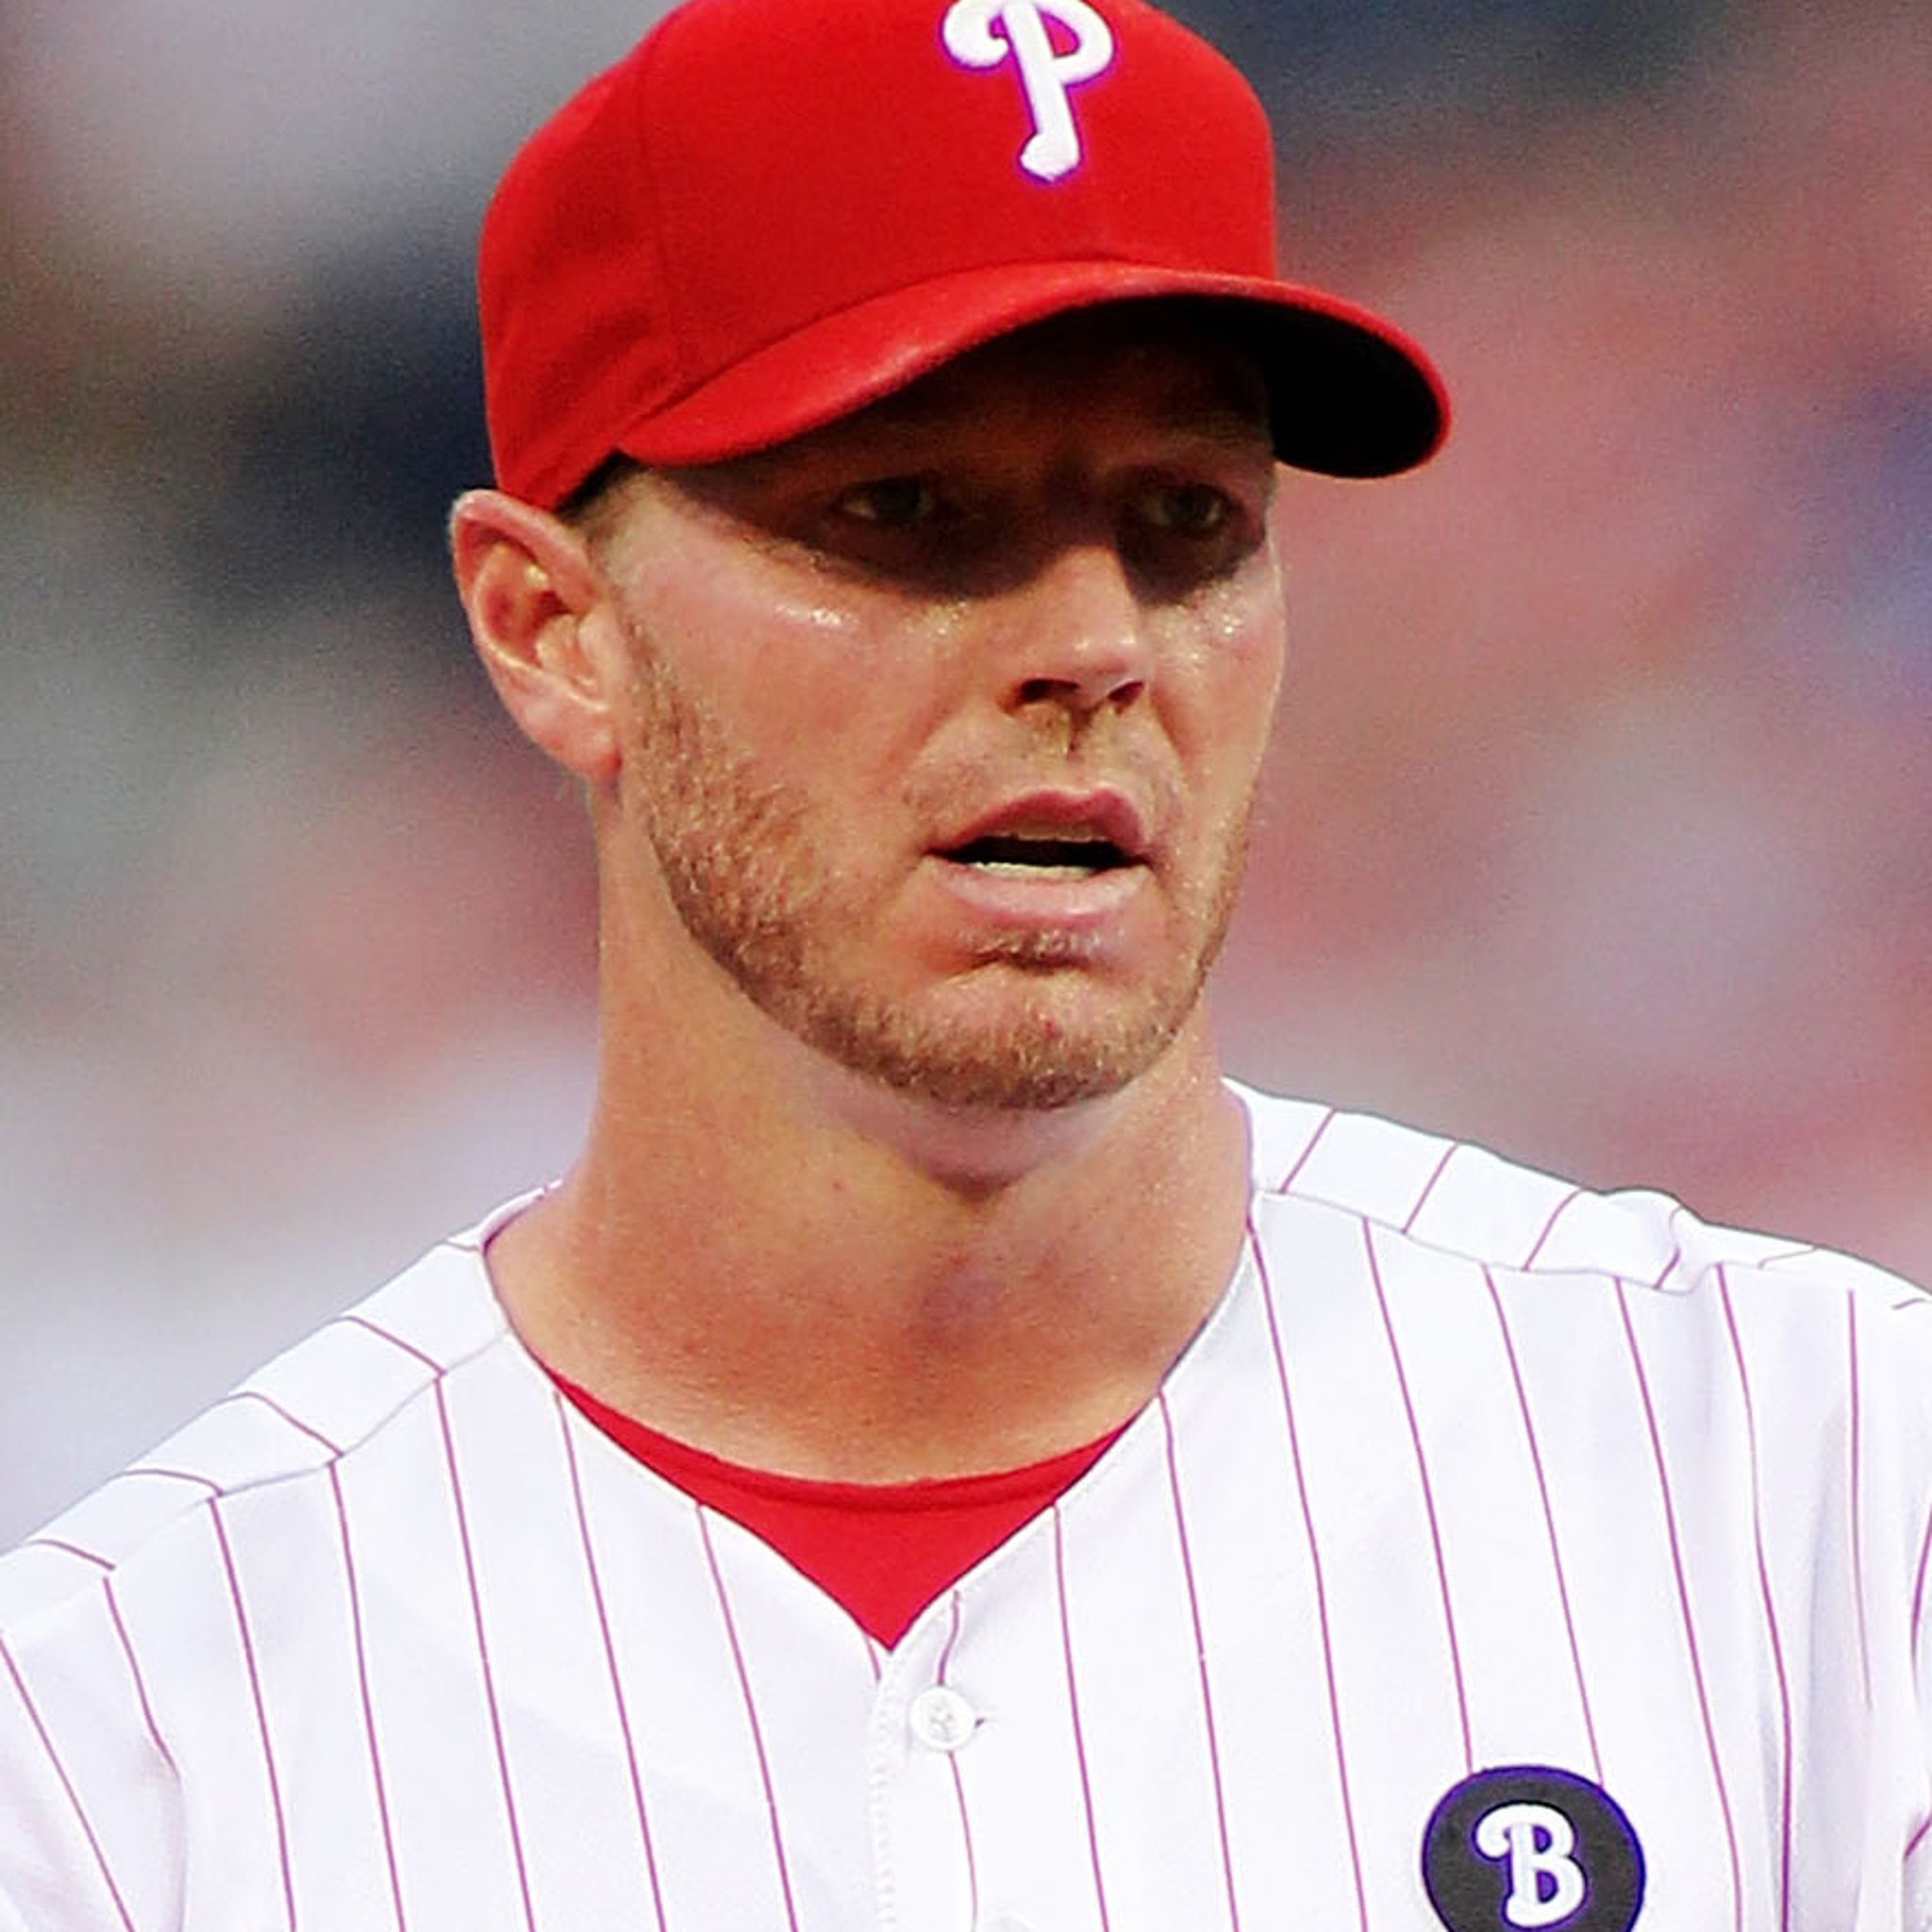 Roy Halladay's Wife On New Plane Crash Report, 'Painful For Our Family